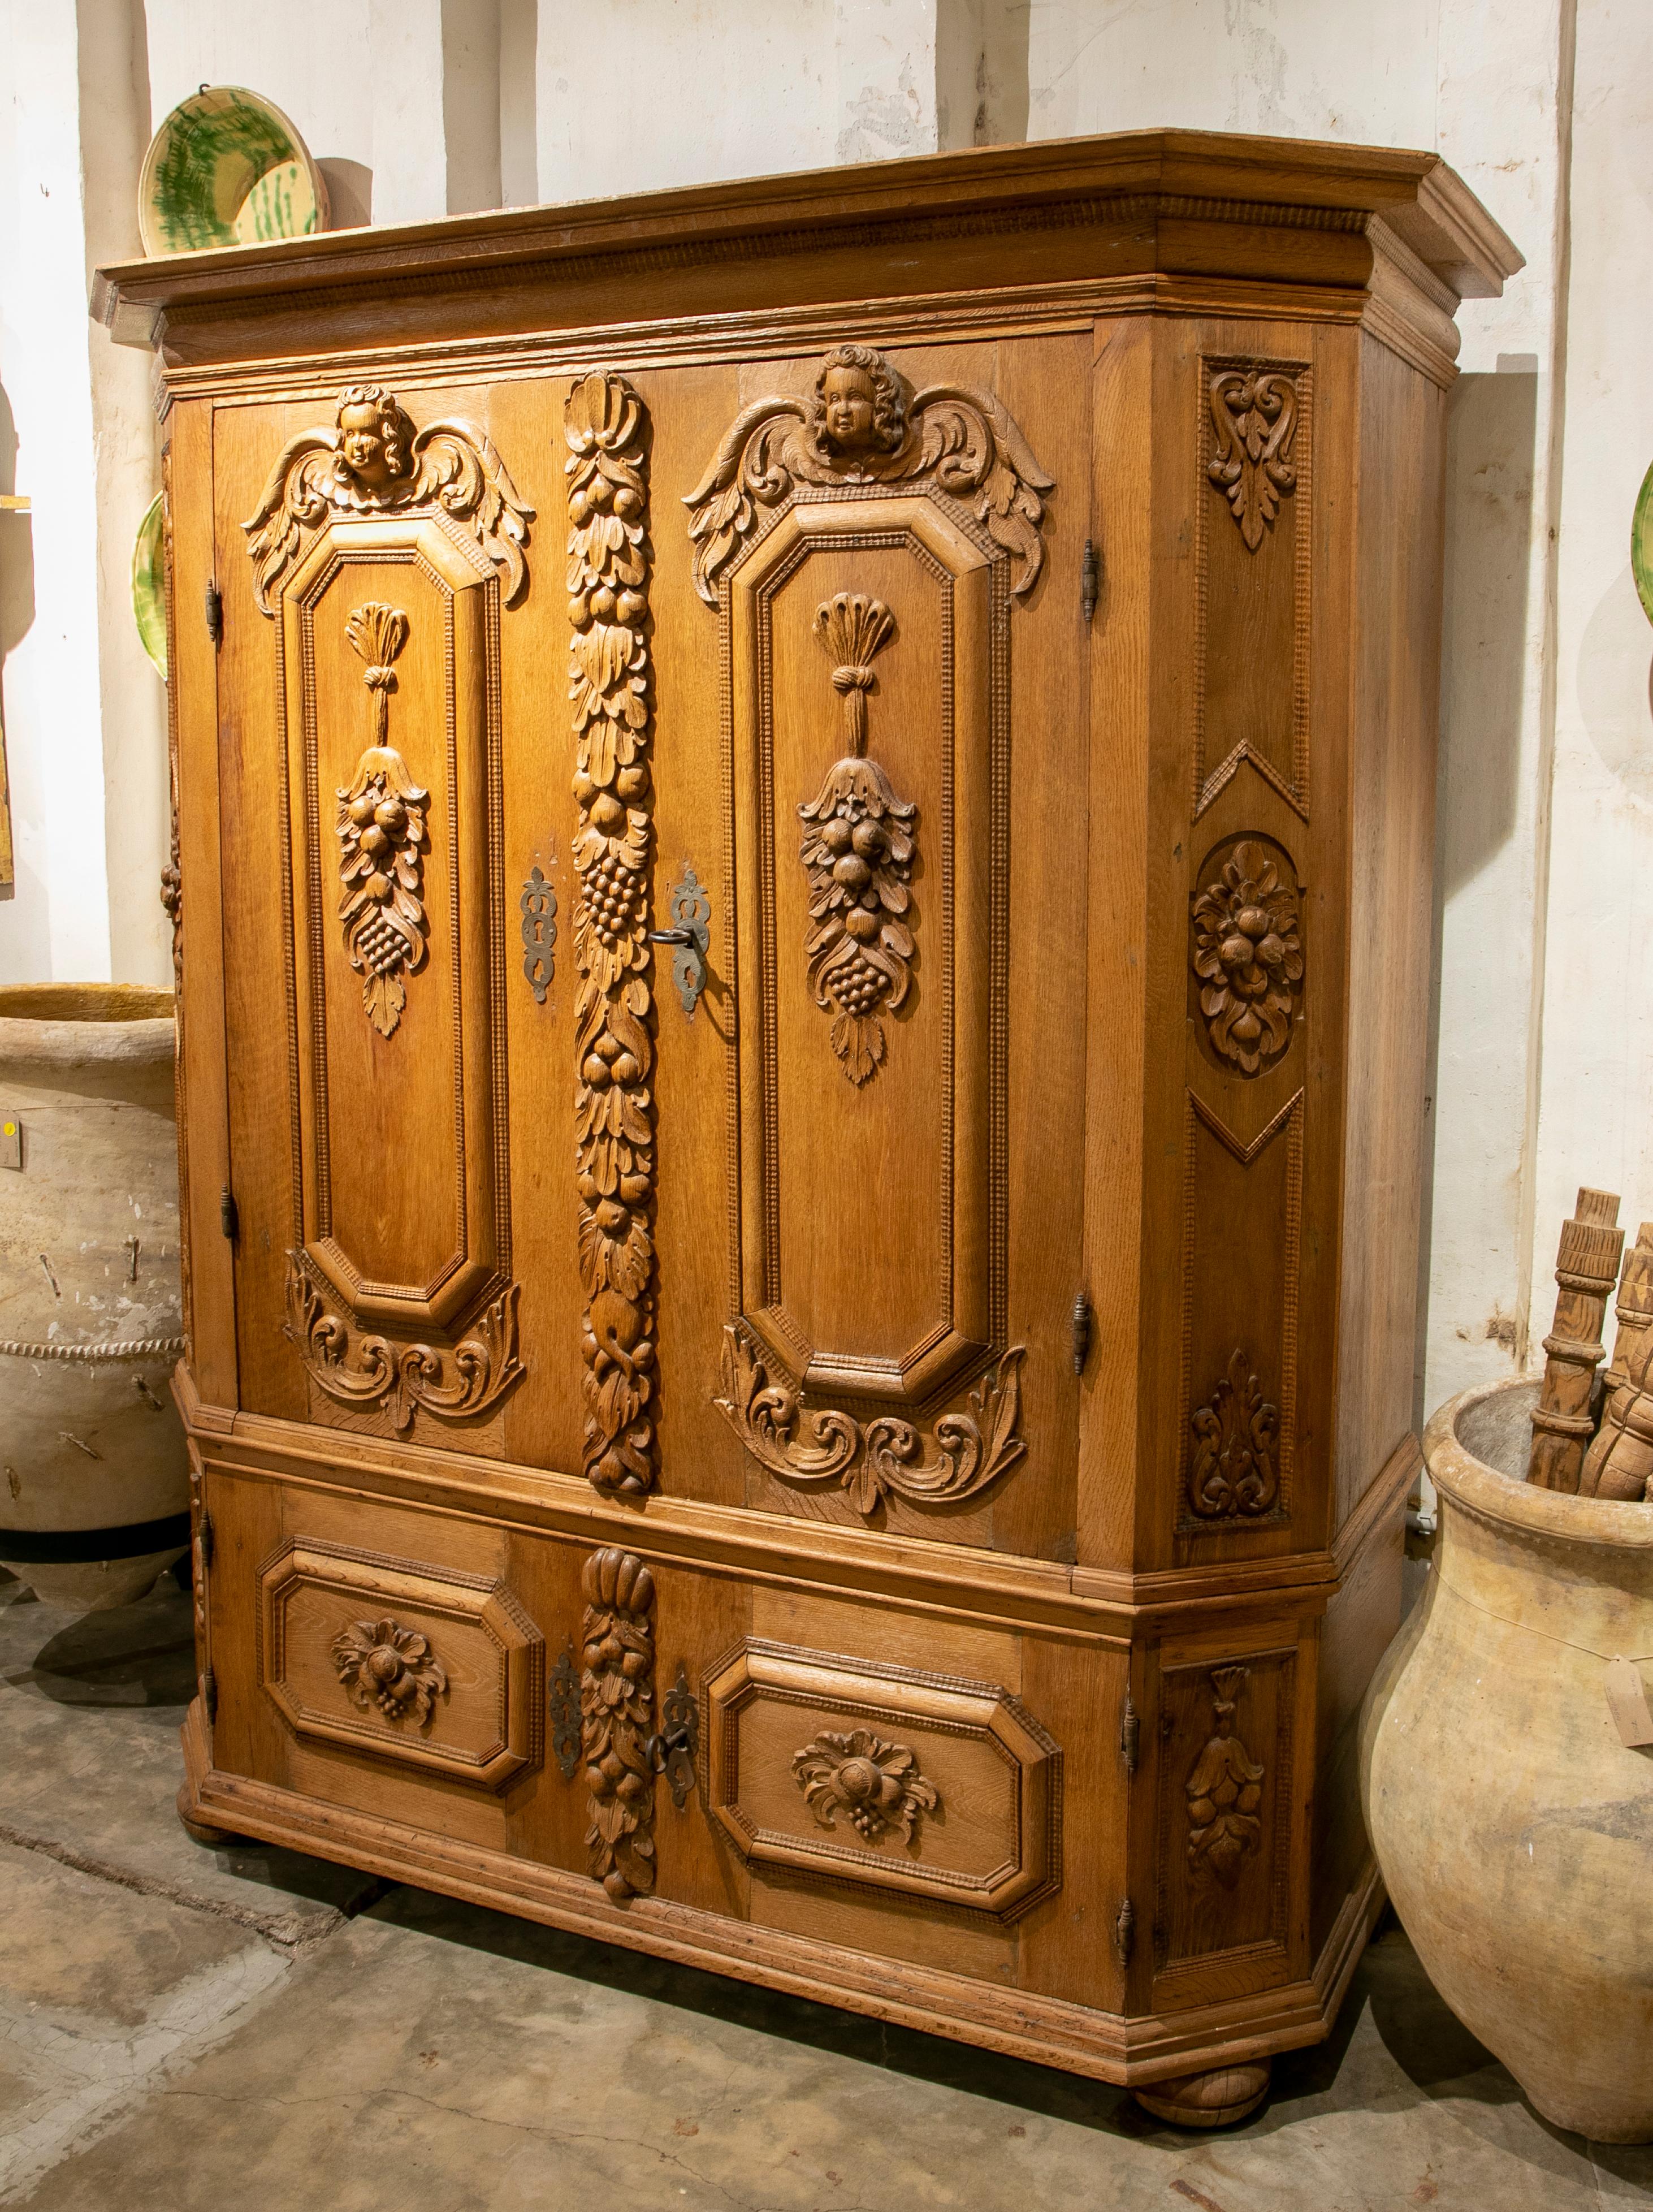 German hand carved wooden cupboard with fruit and angel scenes.